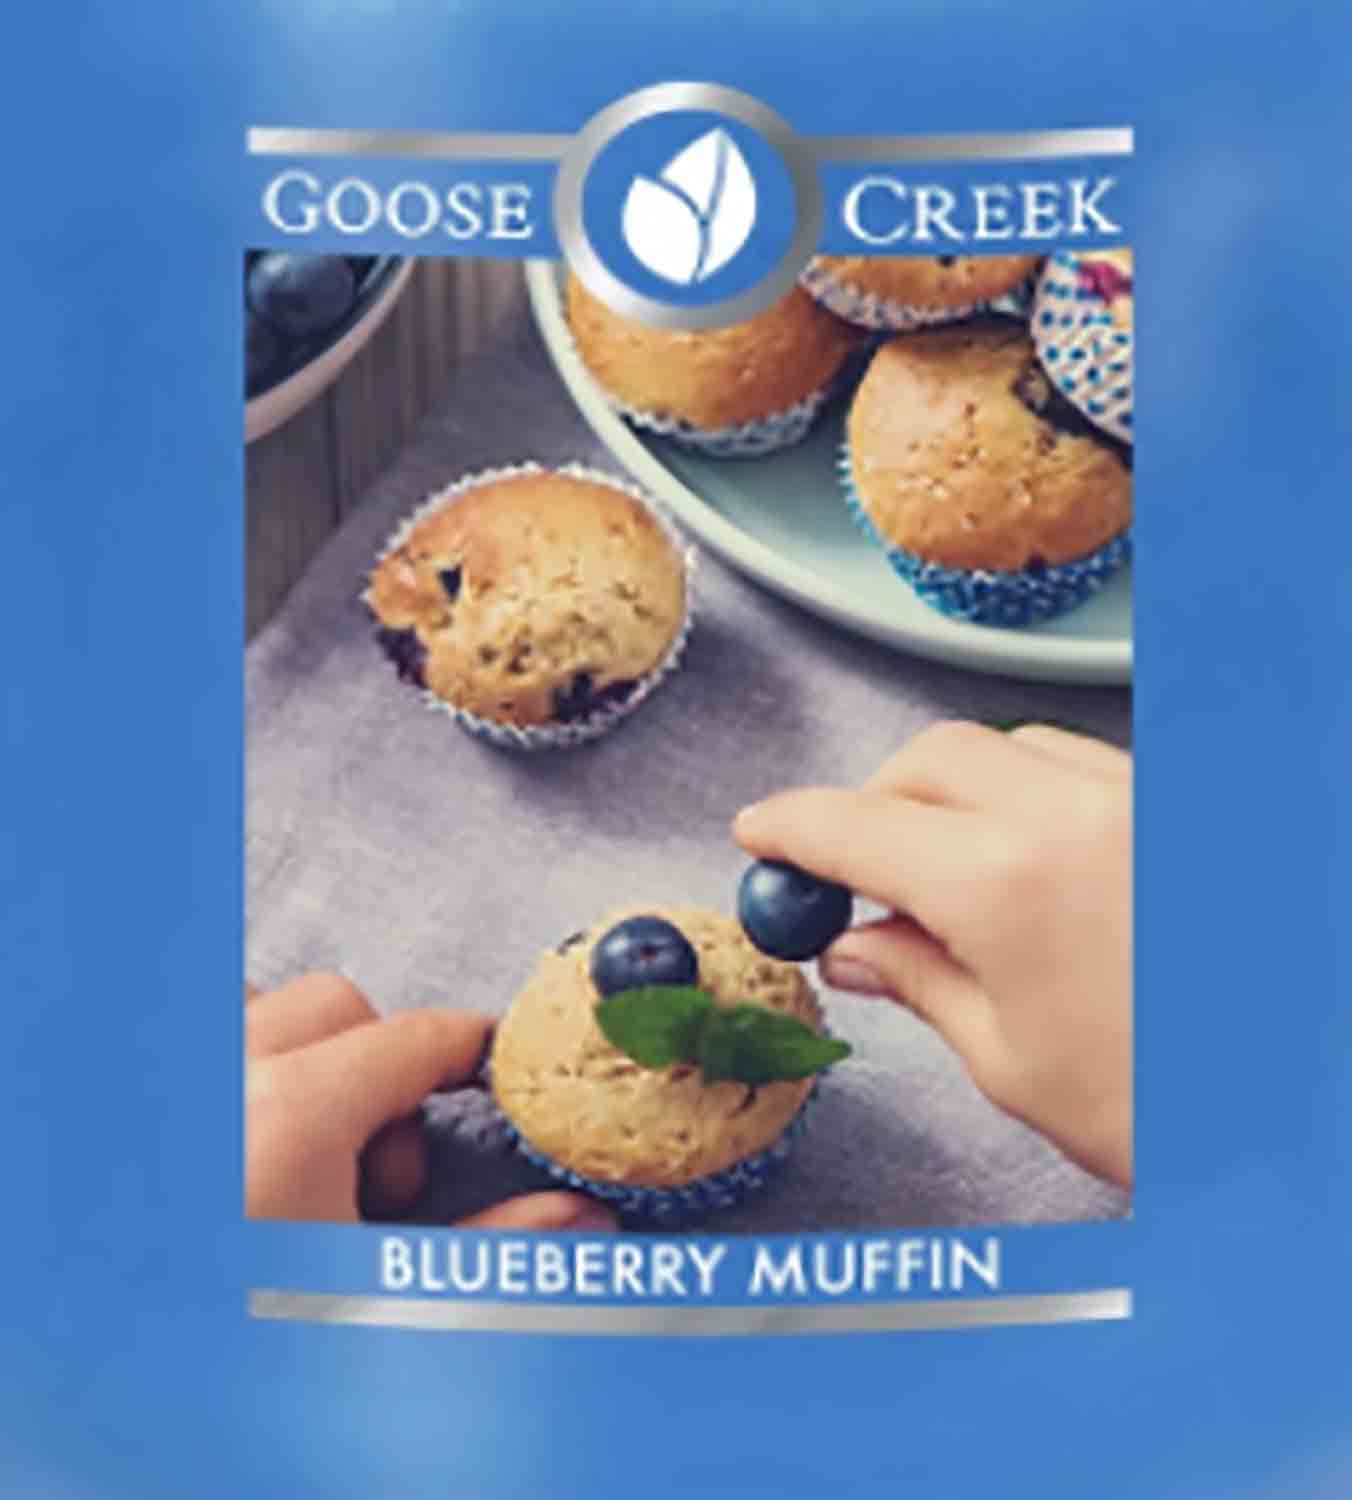 Goose Creek Blueberry Muffin 22g - Crumble vosk